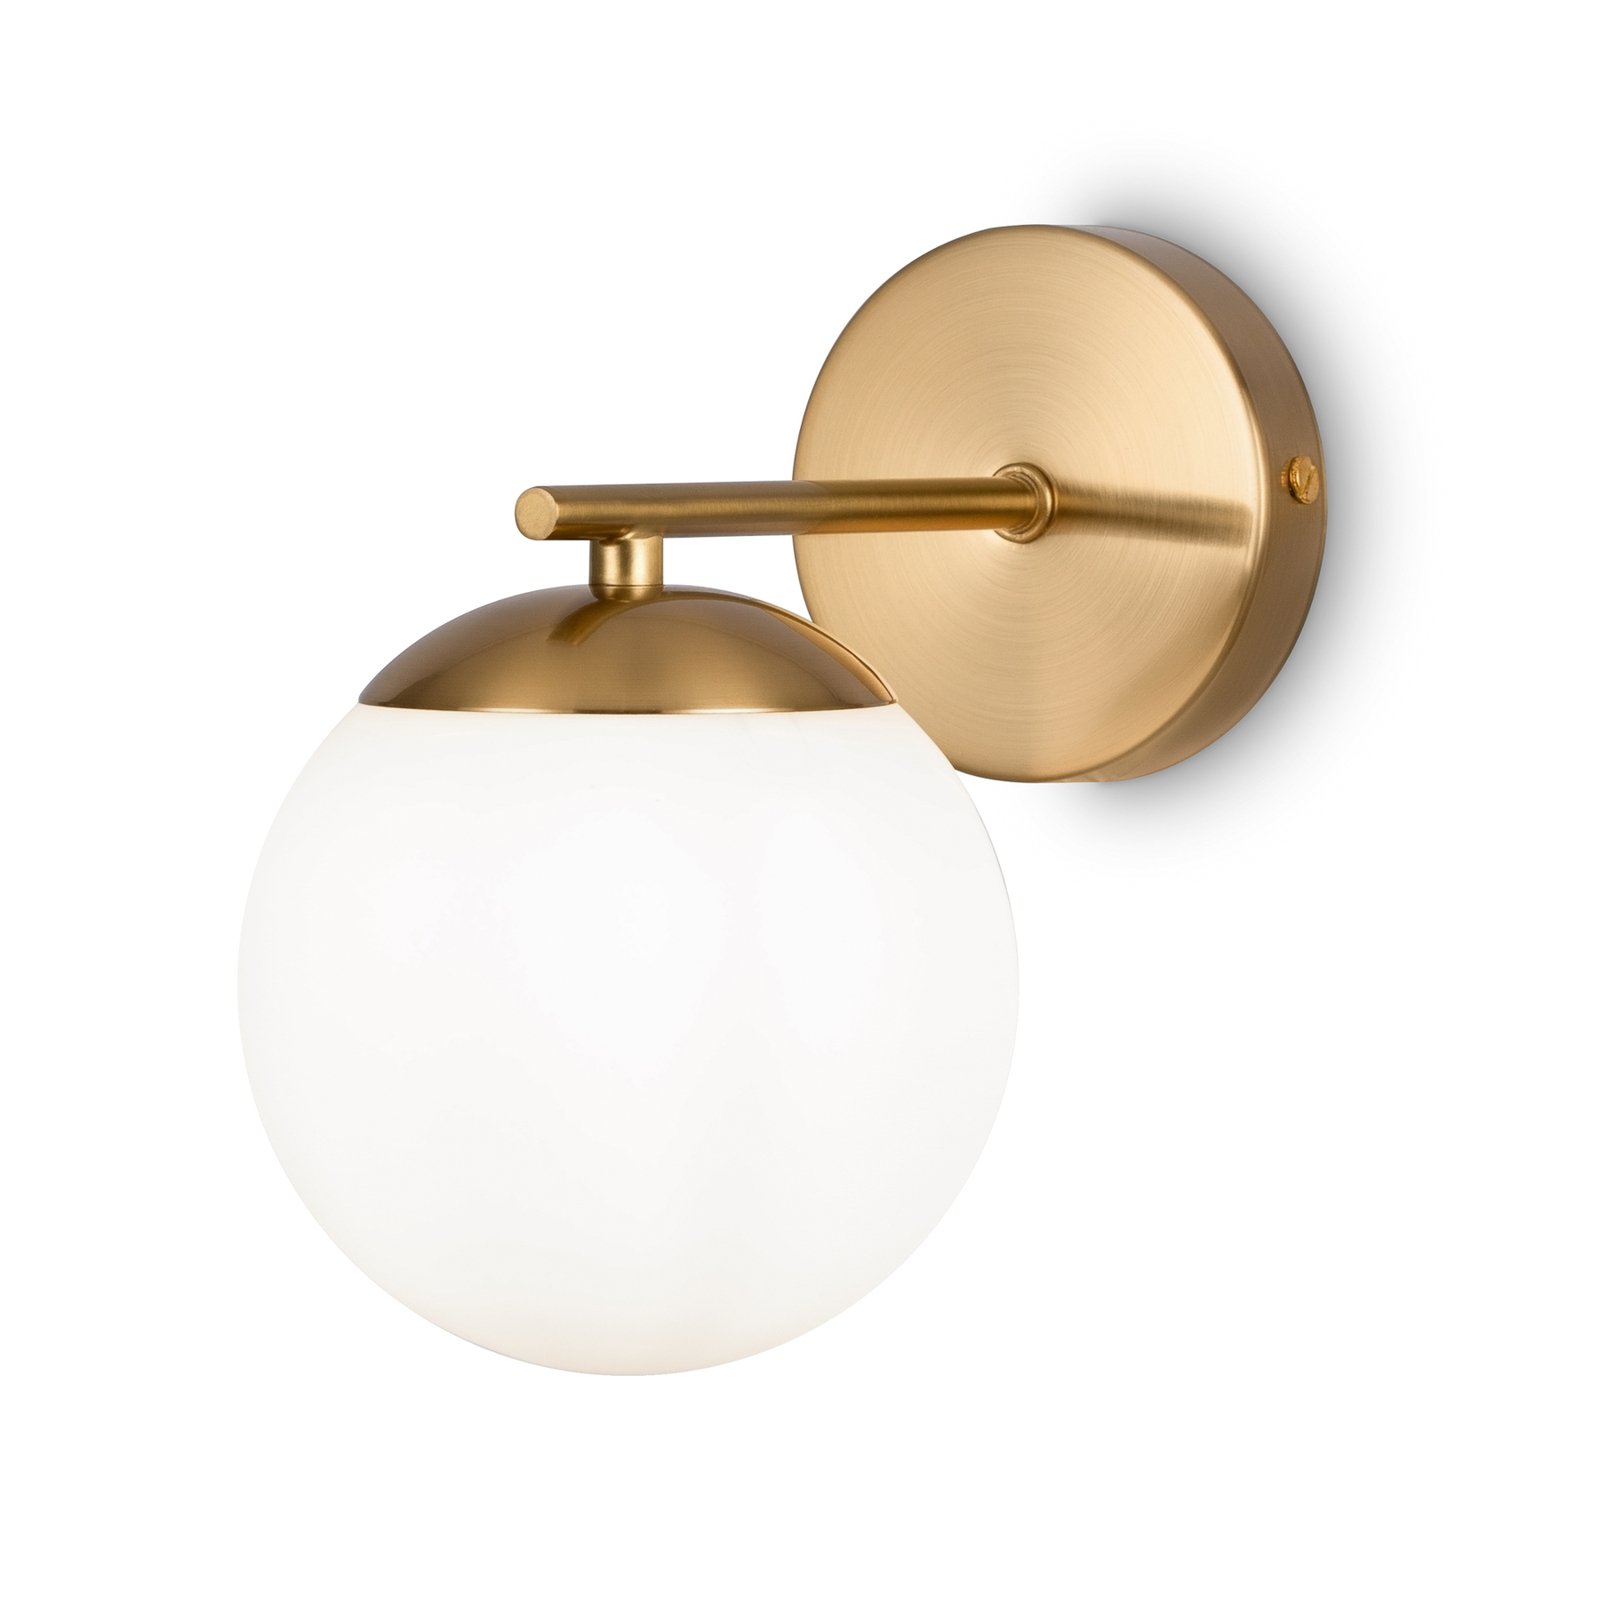 Maytoni Marble wall light with glass shade